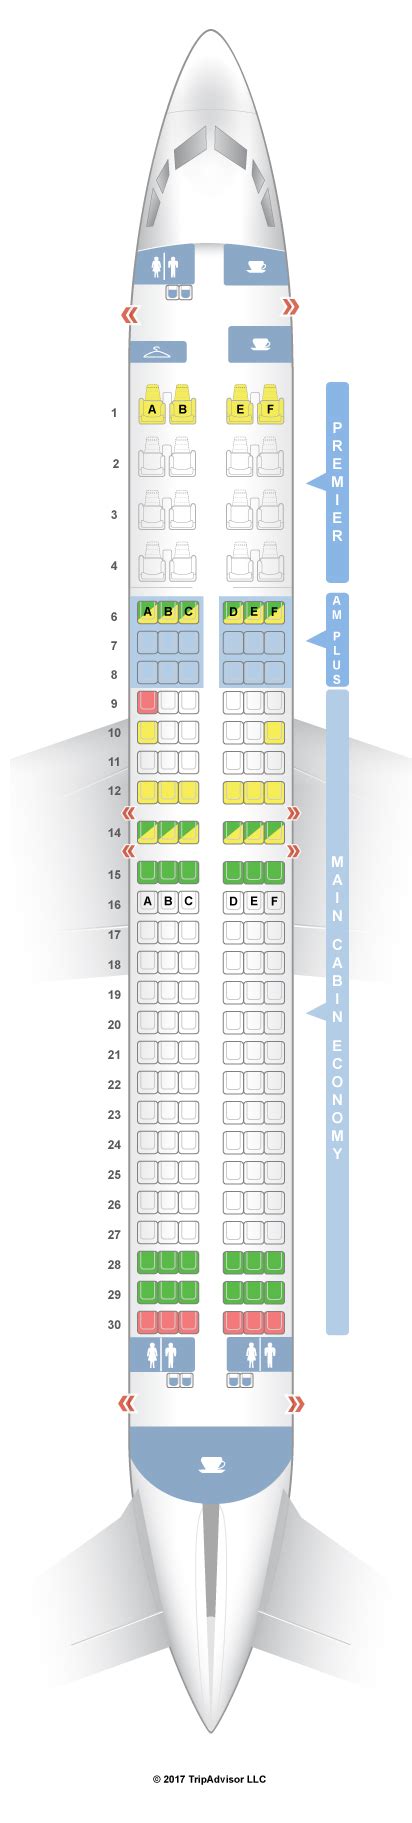 boeing 737-800 seating chart aeromexico